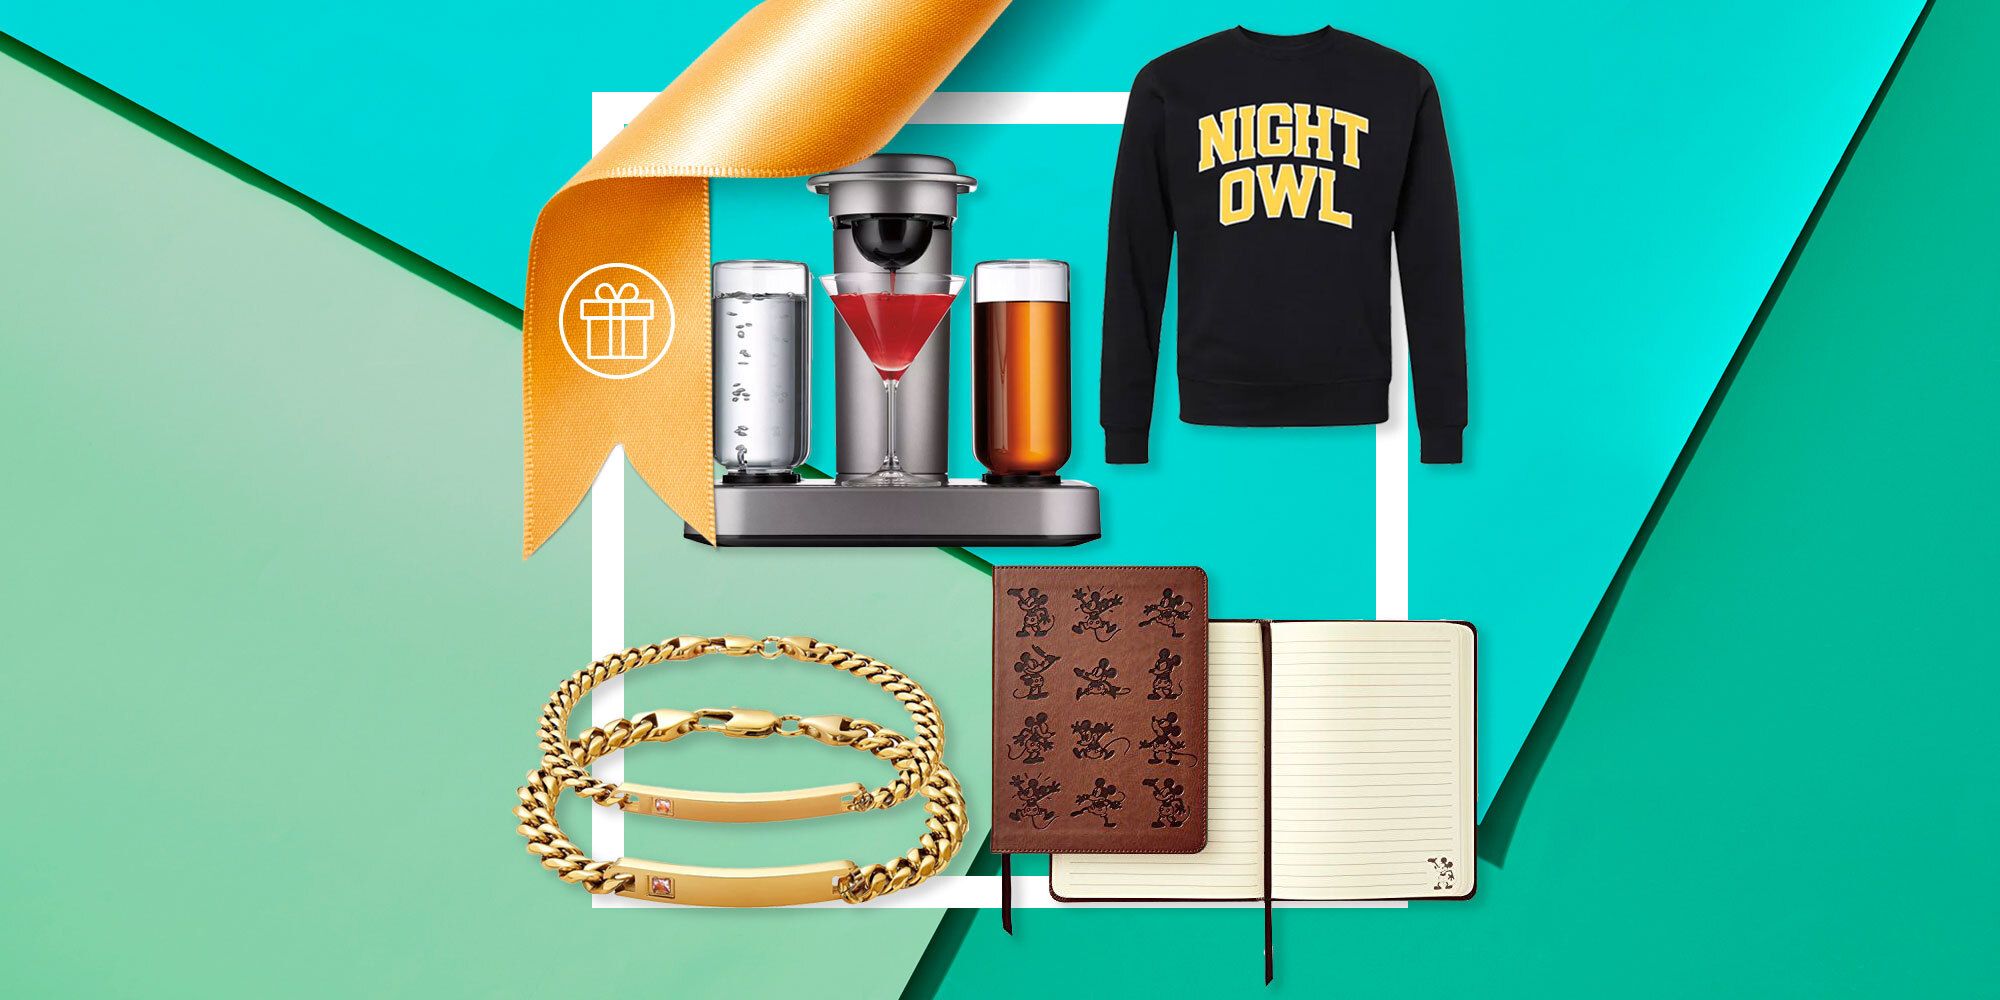 33 Trendy Birthday Gifts For Girlfriend You Seriously Can't Go